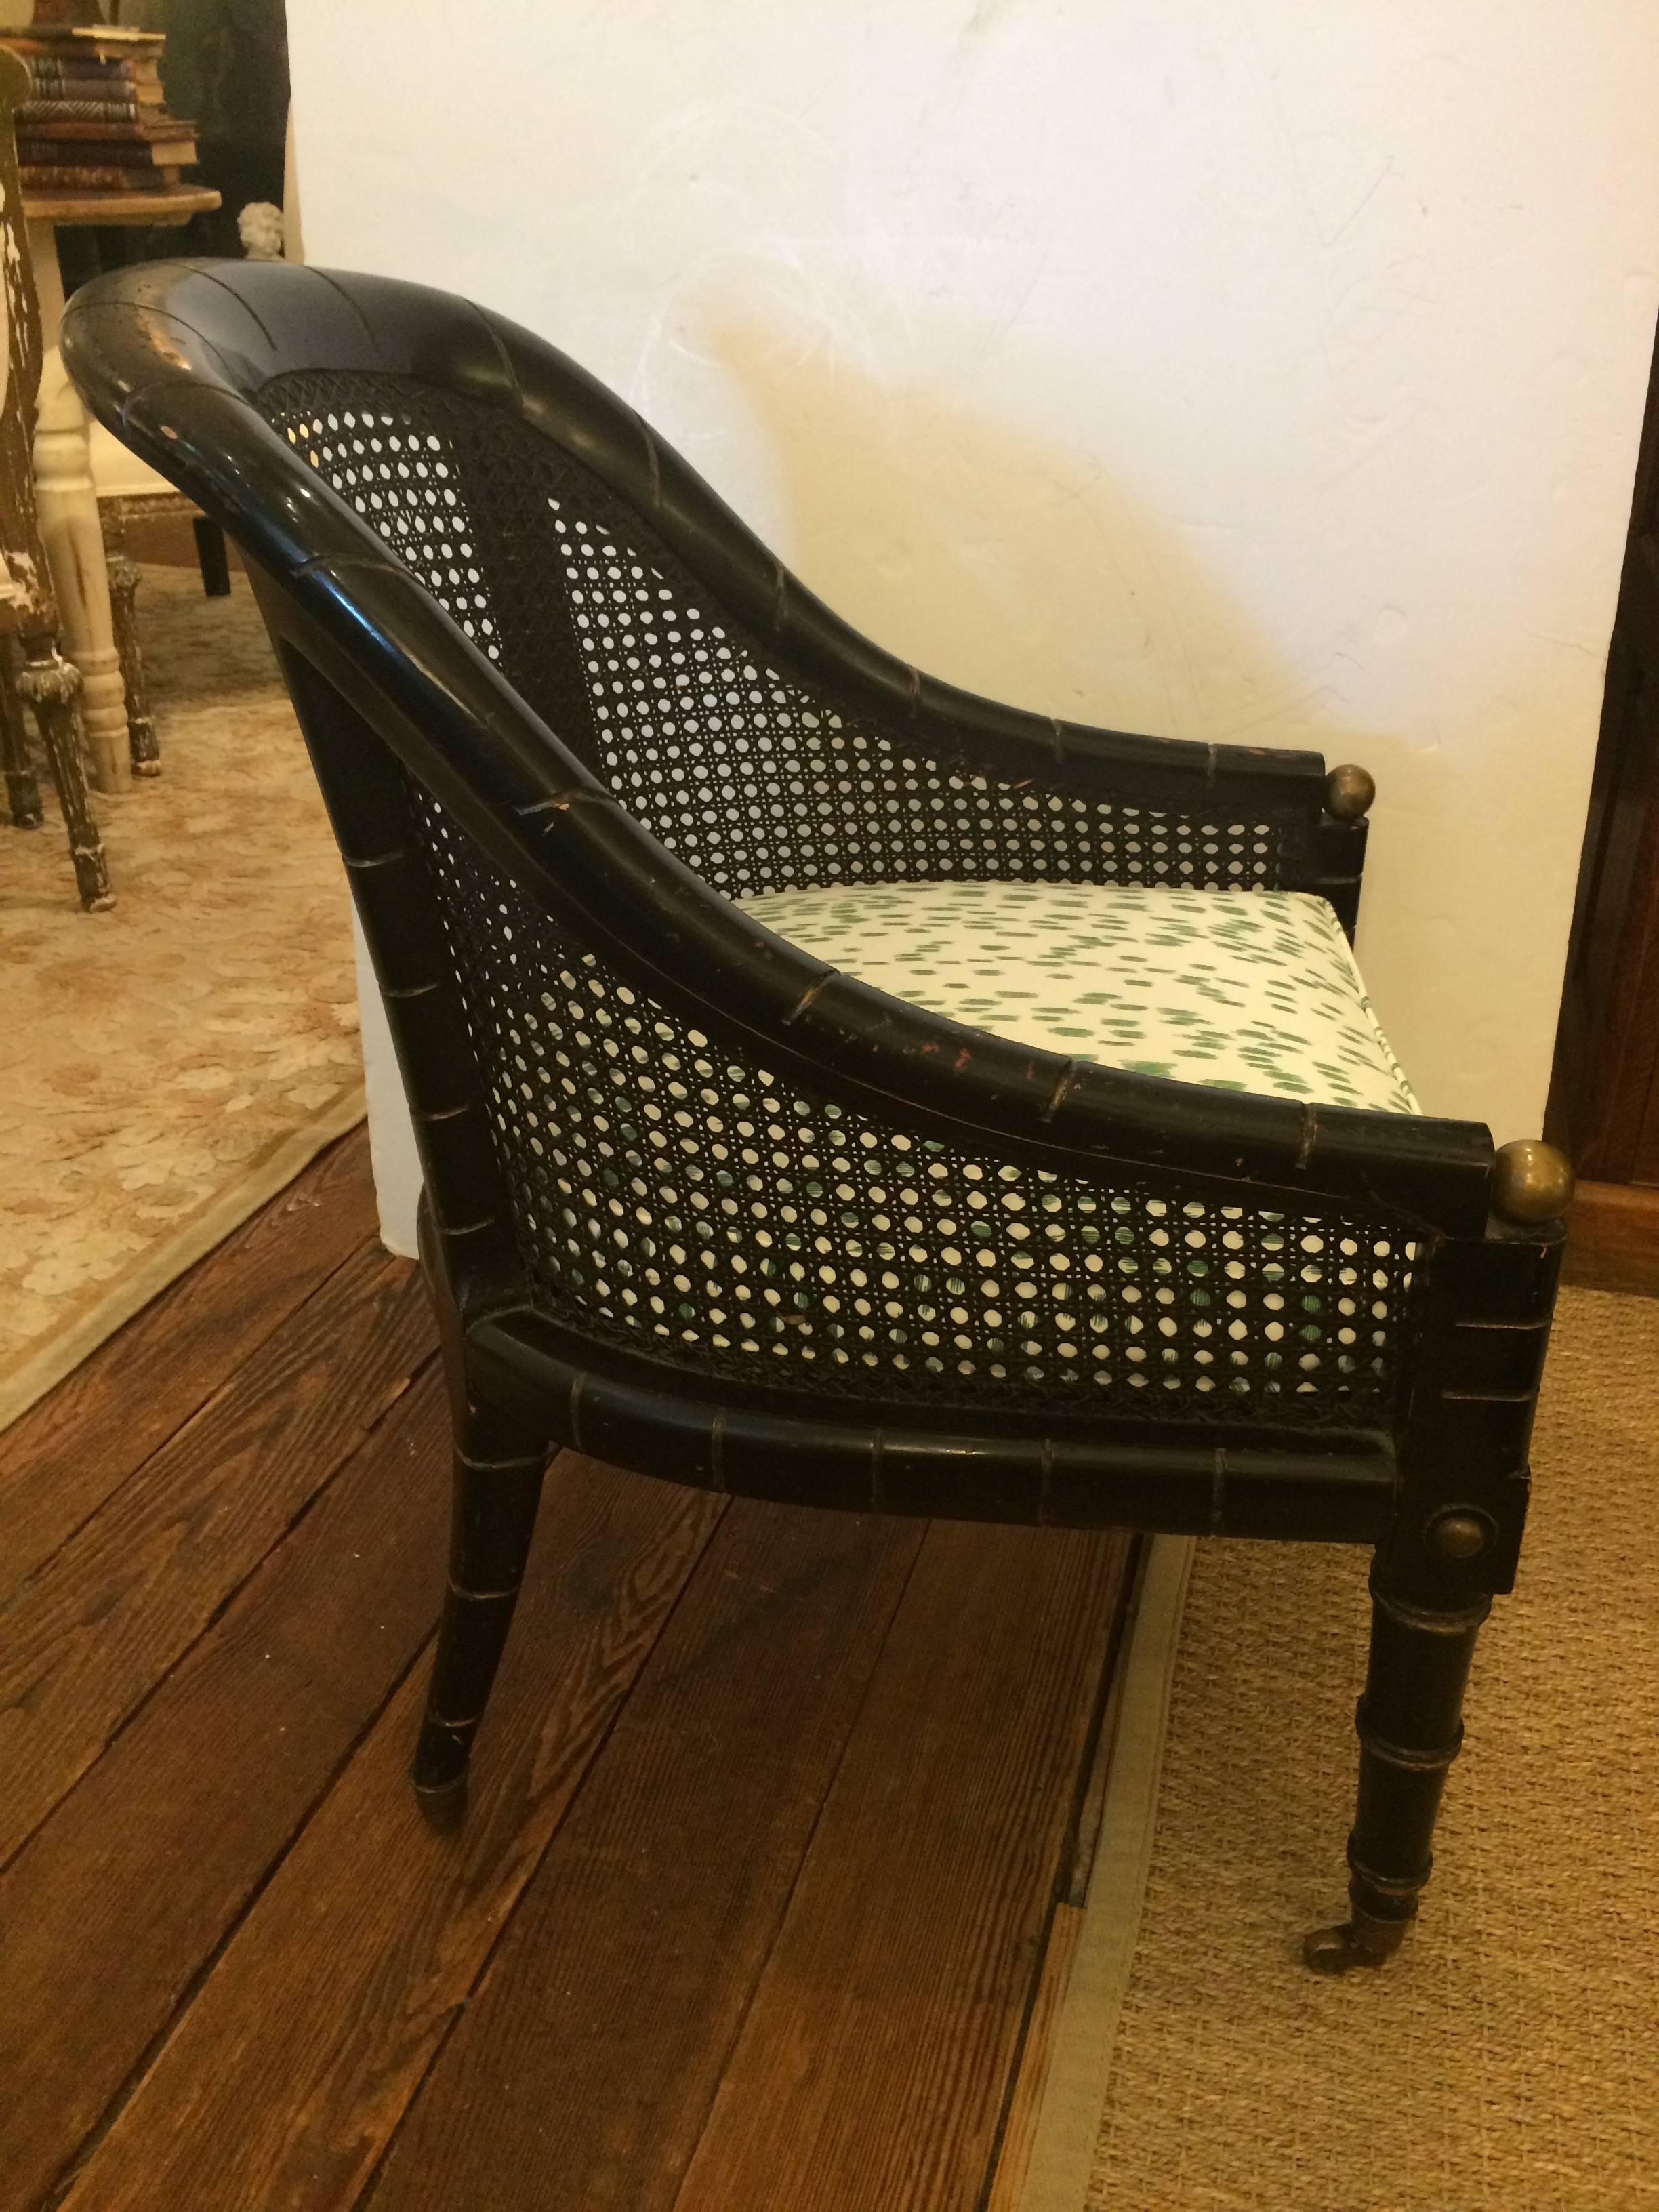 Chic black ebonized wood compact occasional chair having faux bamboo style legs with brass ball finials and decoration as well as caned back and seat. There's a new stylish cushion in Brunschwig and Fils green and white fabric. Seat depth 19.